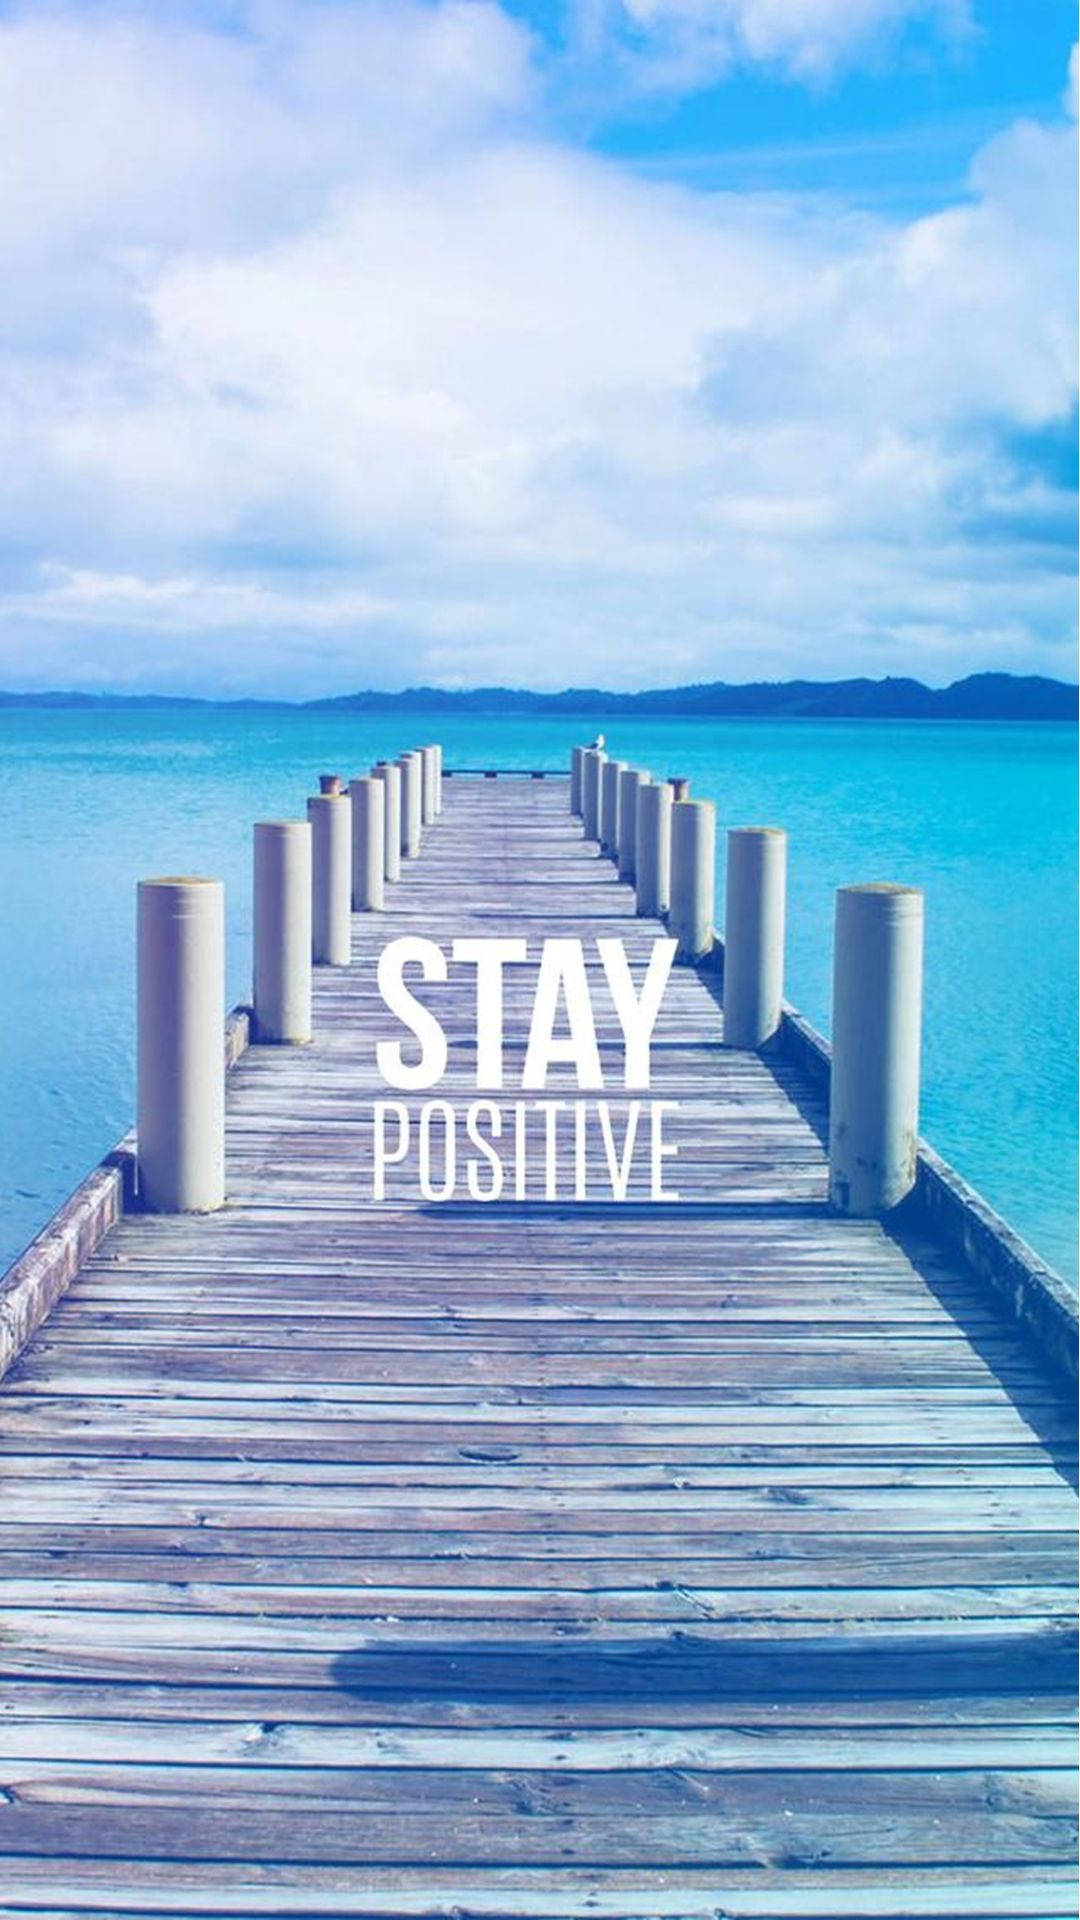 Stay Positive Motivational Iphone Wallpaper